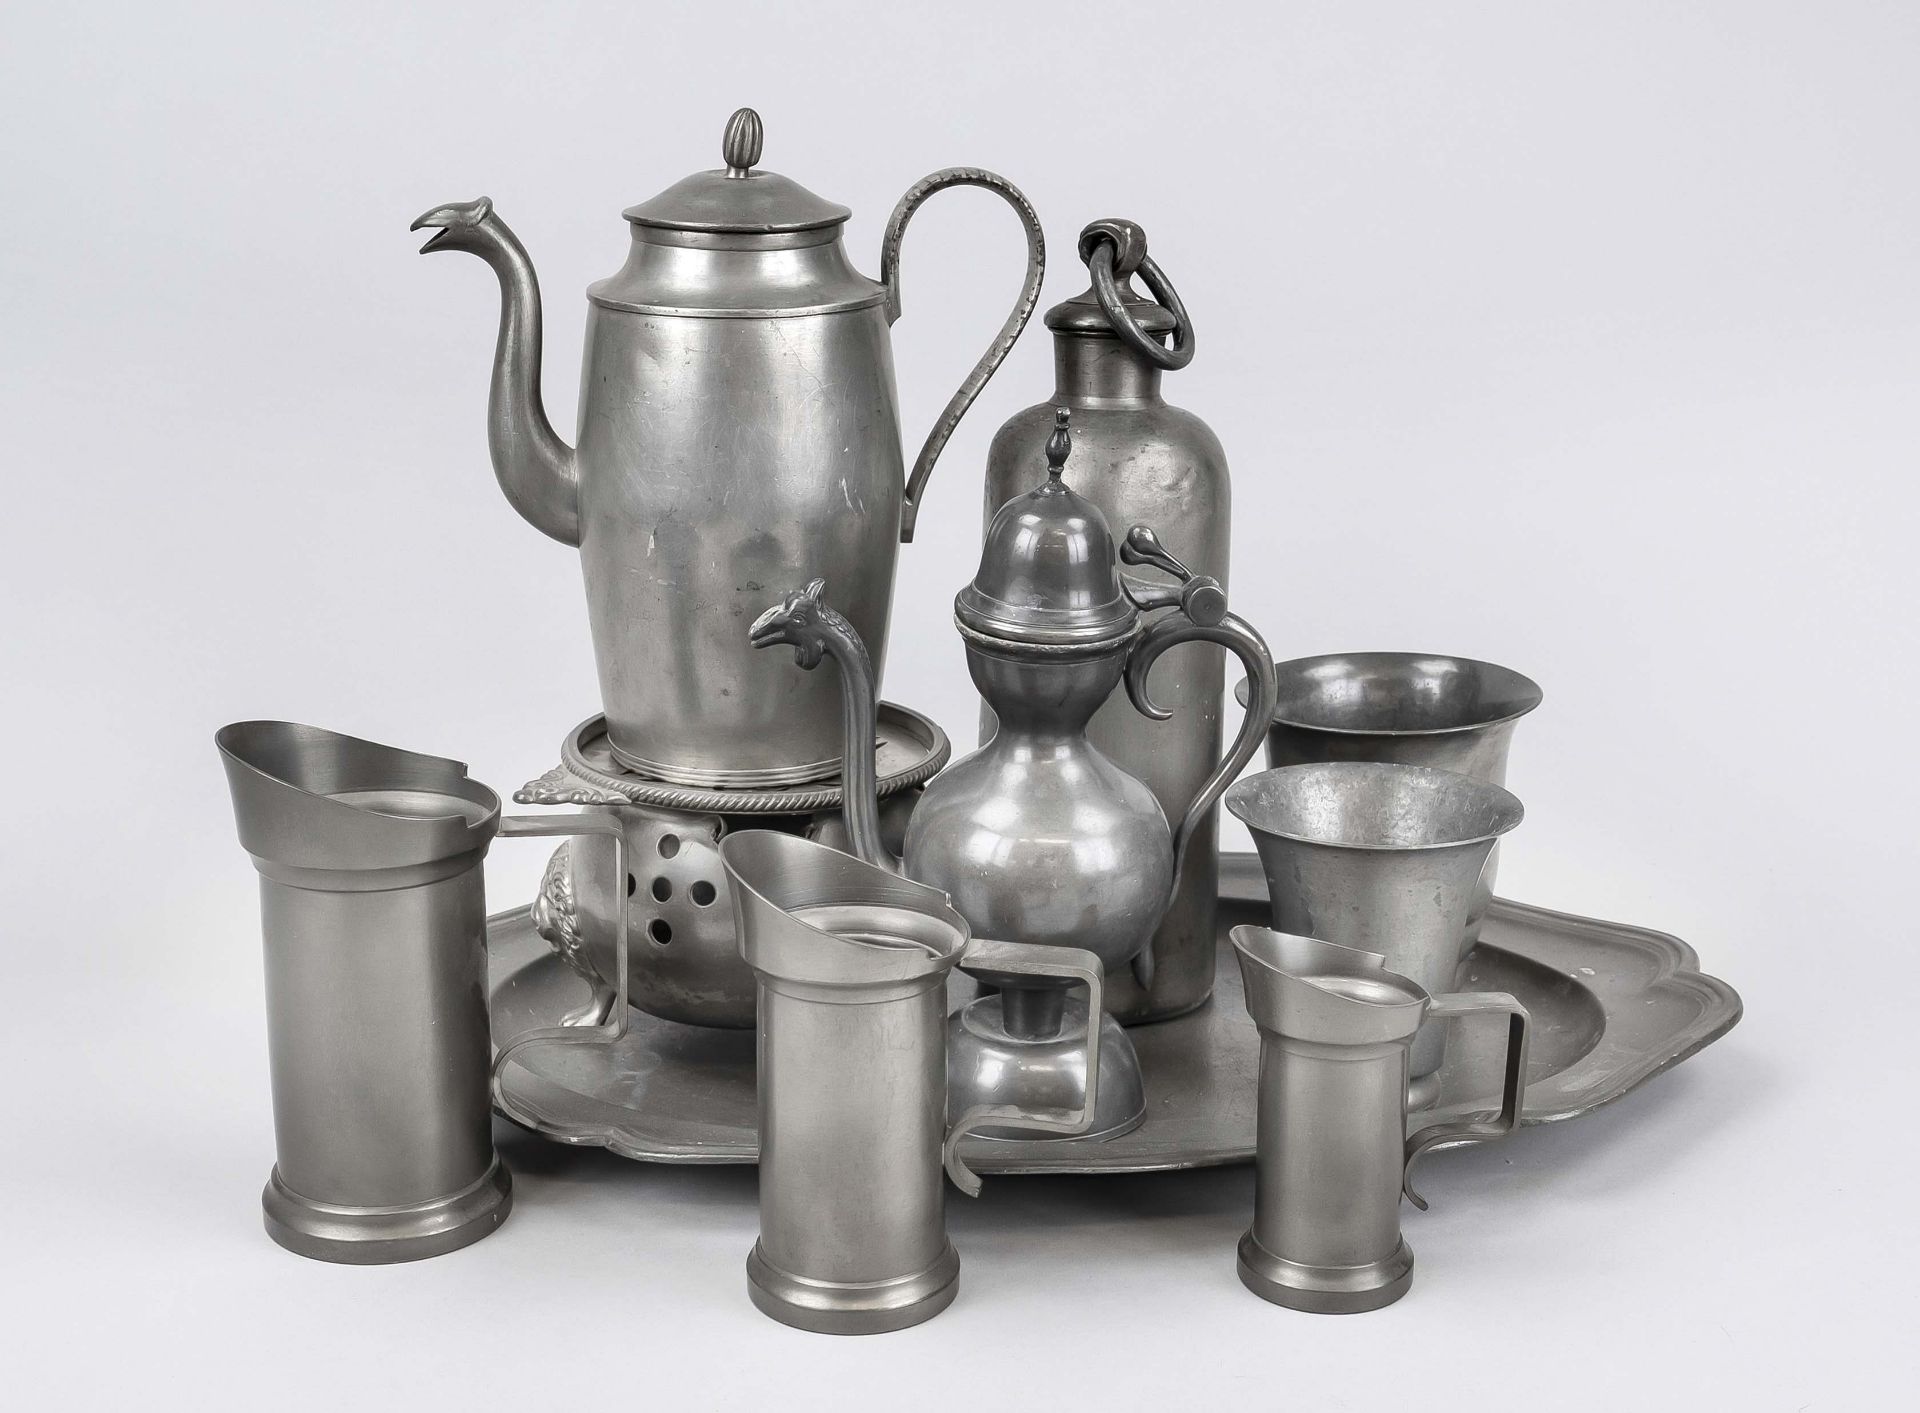 10 pieces of pewter 19th/20th c., consisting of a tray, hot water bottle, a teapot with lion